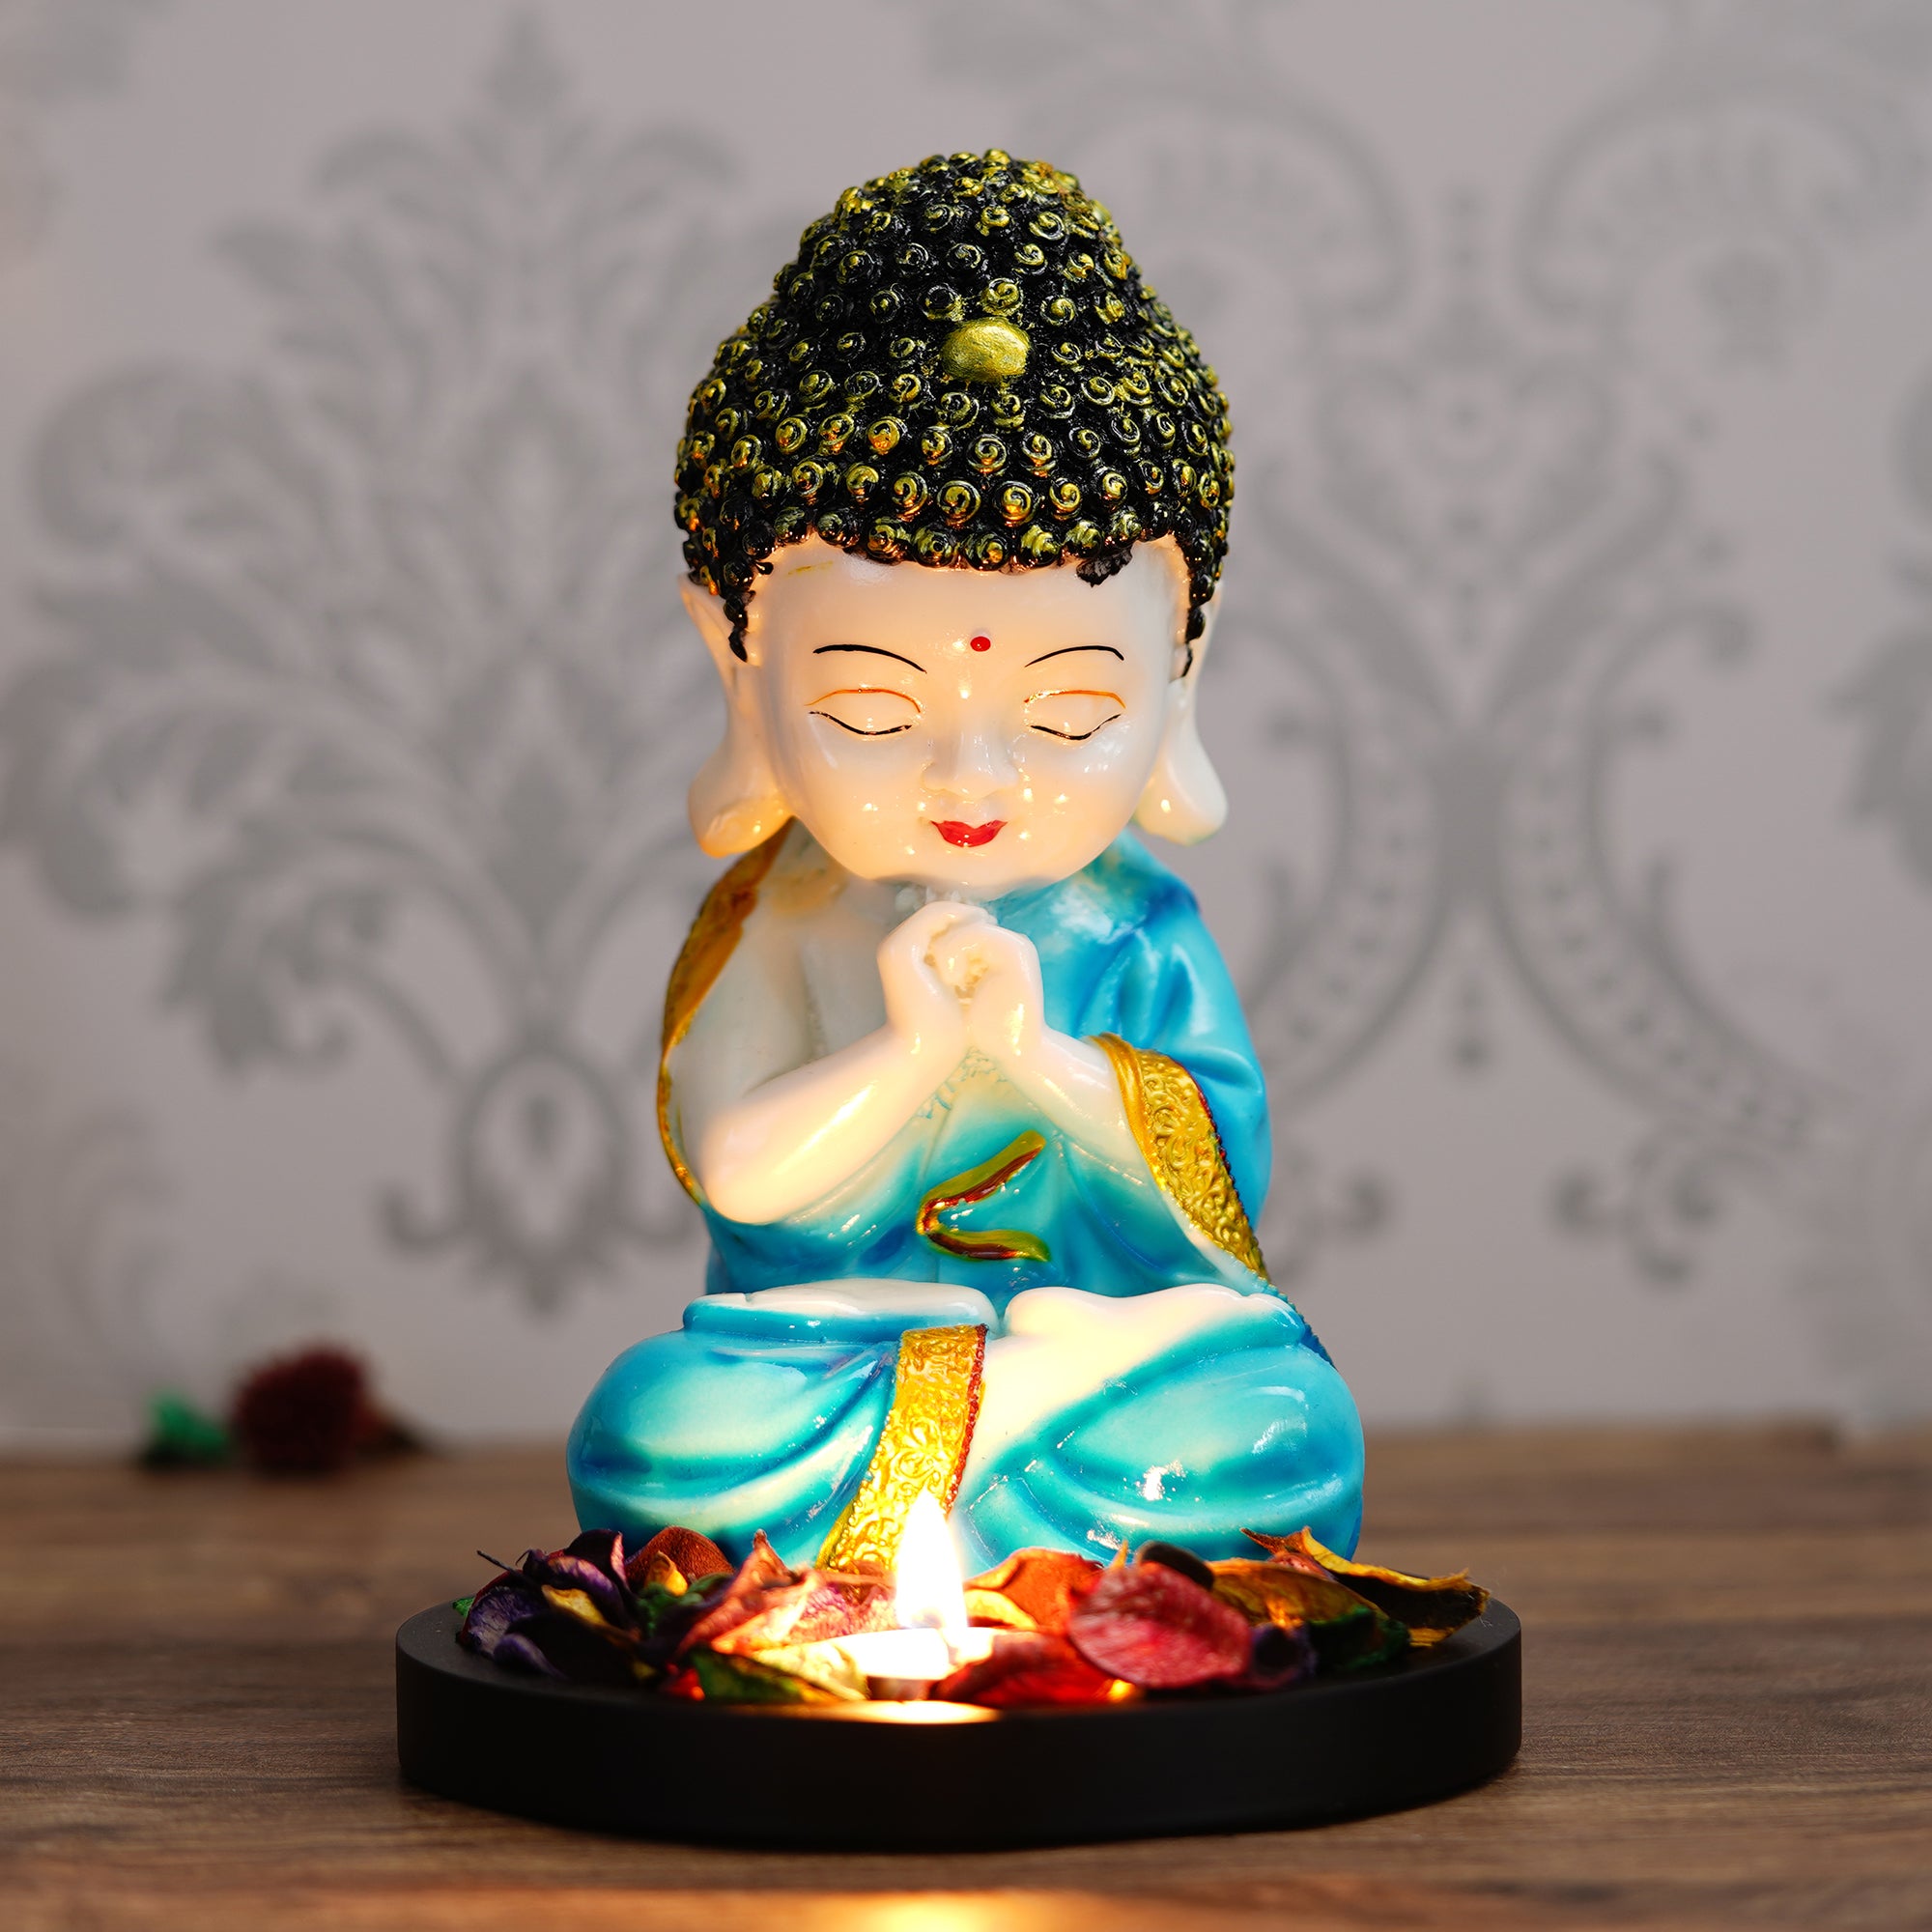 Polyresin Blue and White Praying Monk Buddha Statue with Wooden Base, Fragranced Petals and Tealight 1